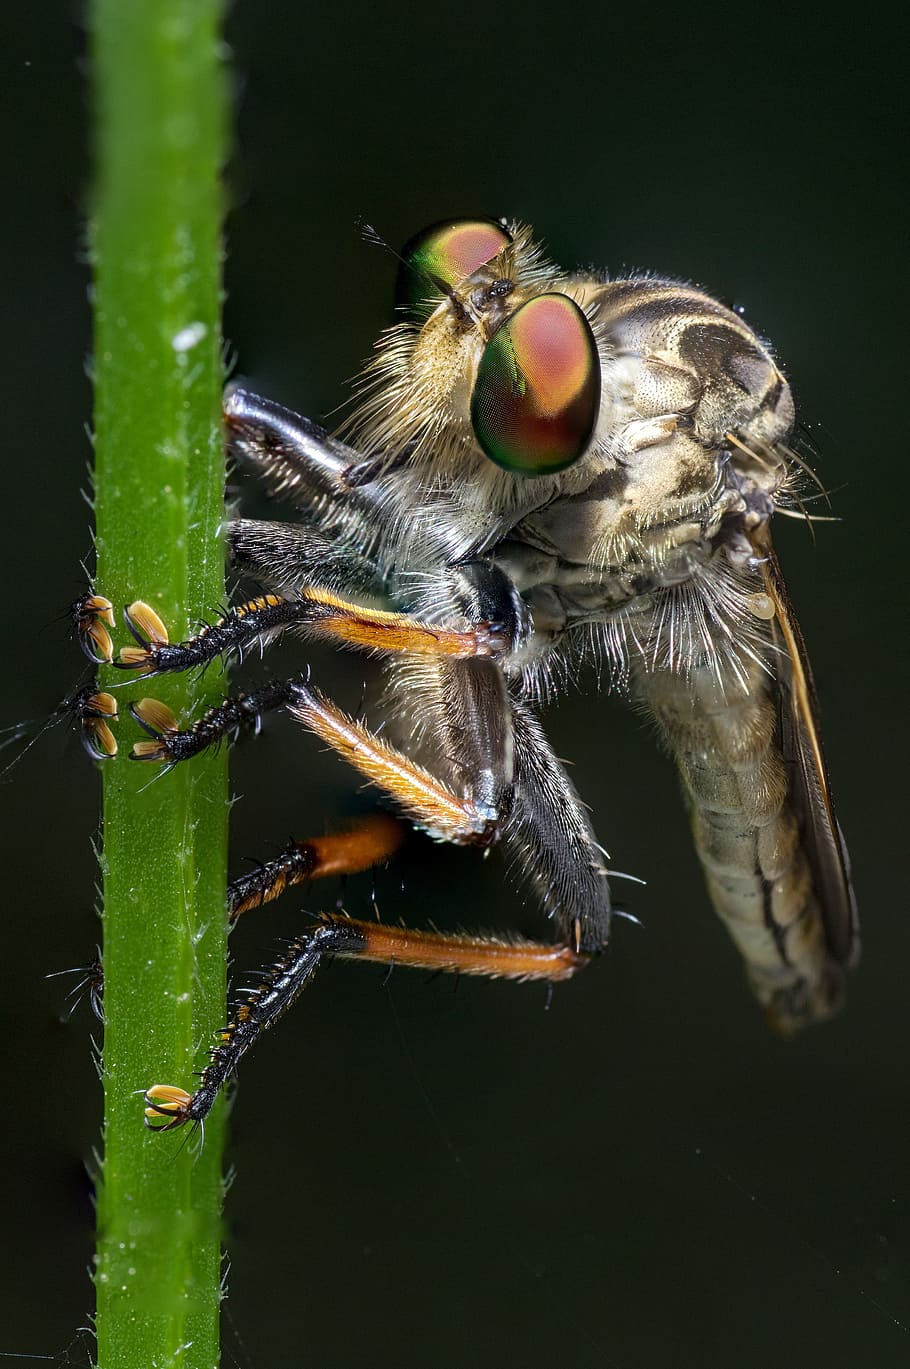 Robber Fly, Macro, Insect, Nature, fly, bug, compound eyes, wildlife, animal, close-up